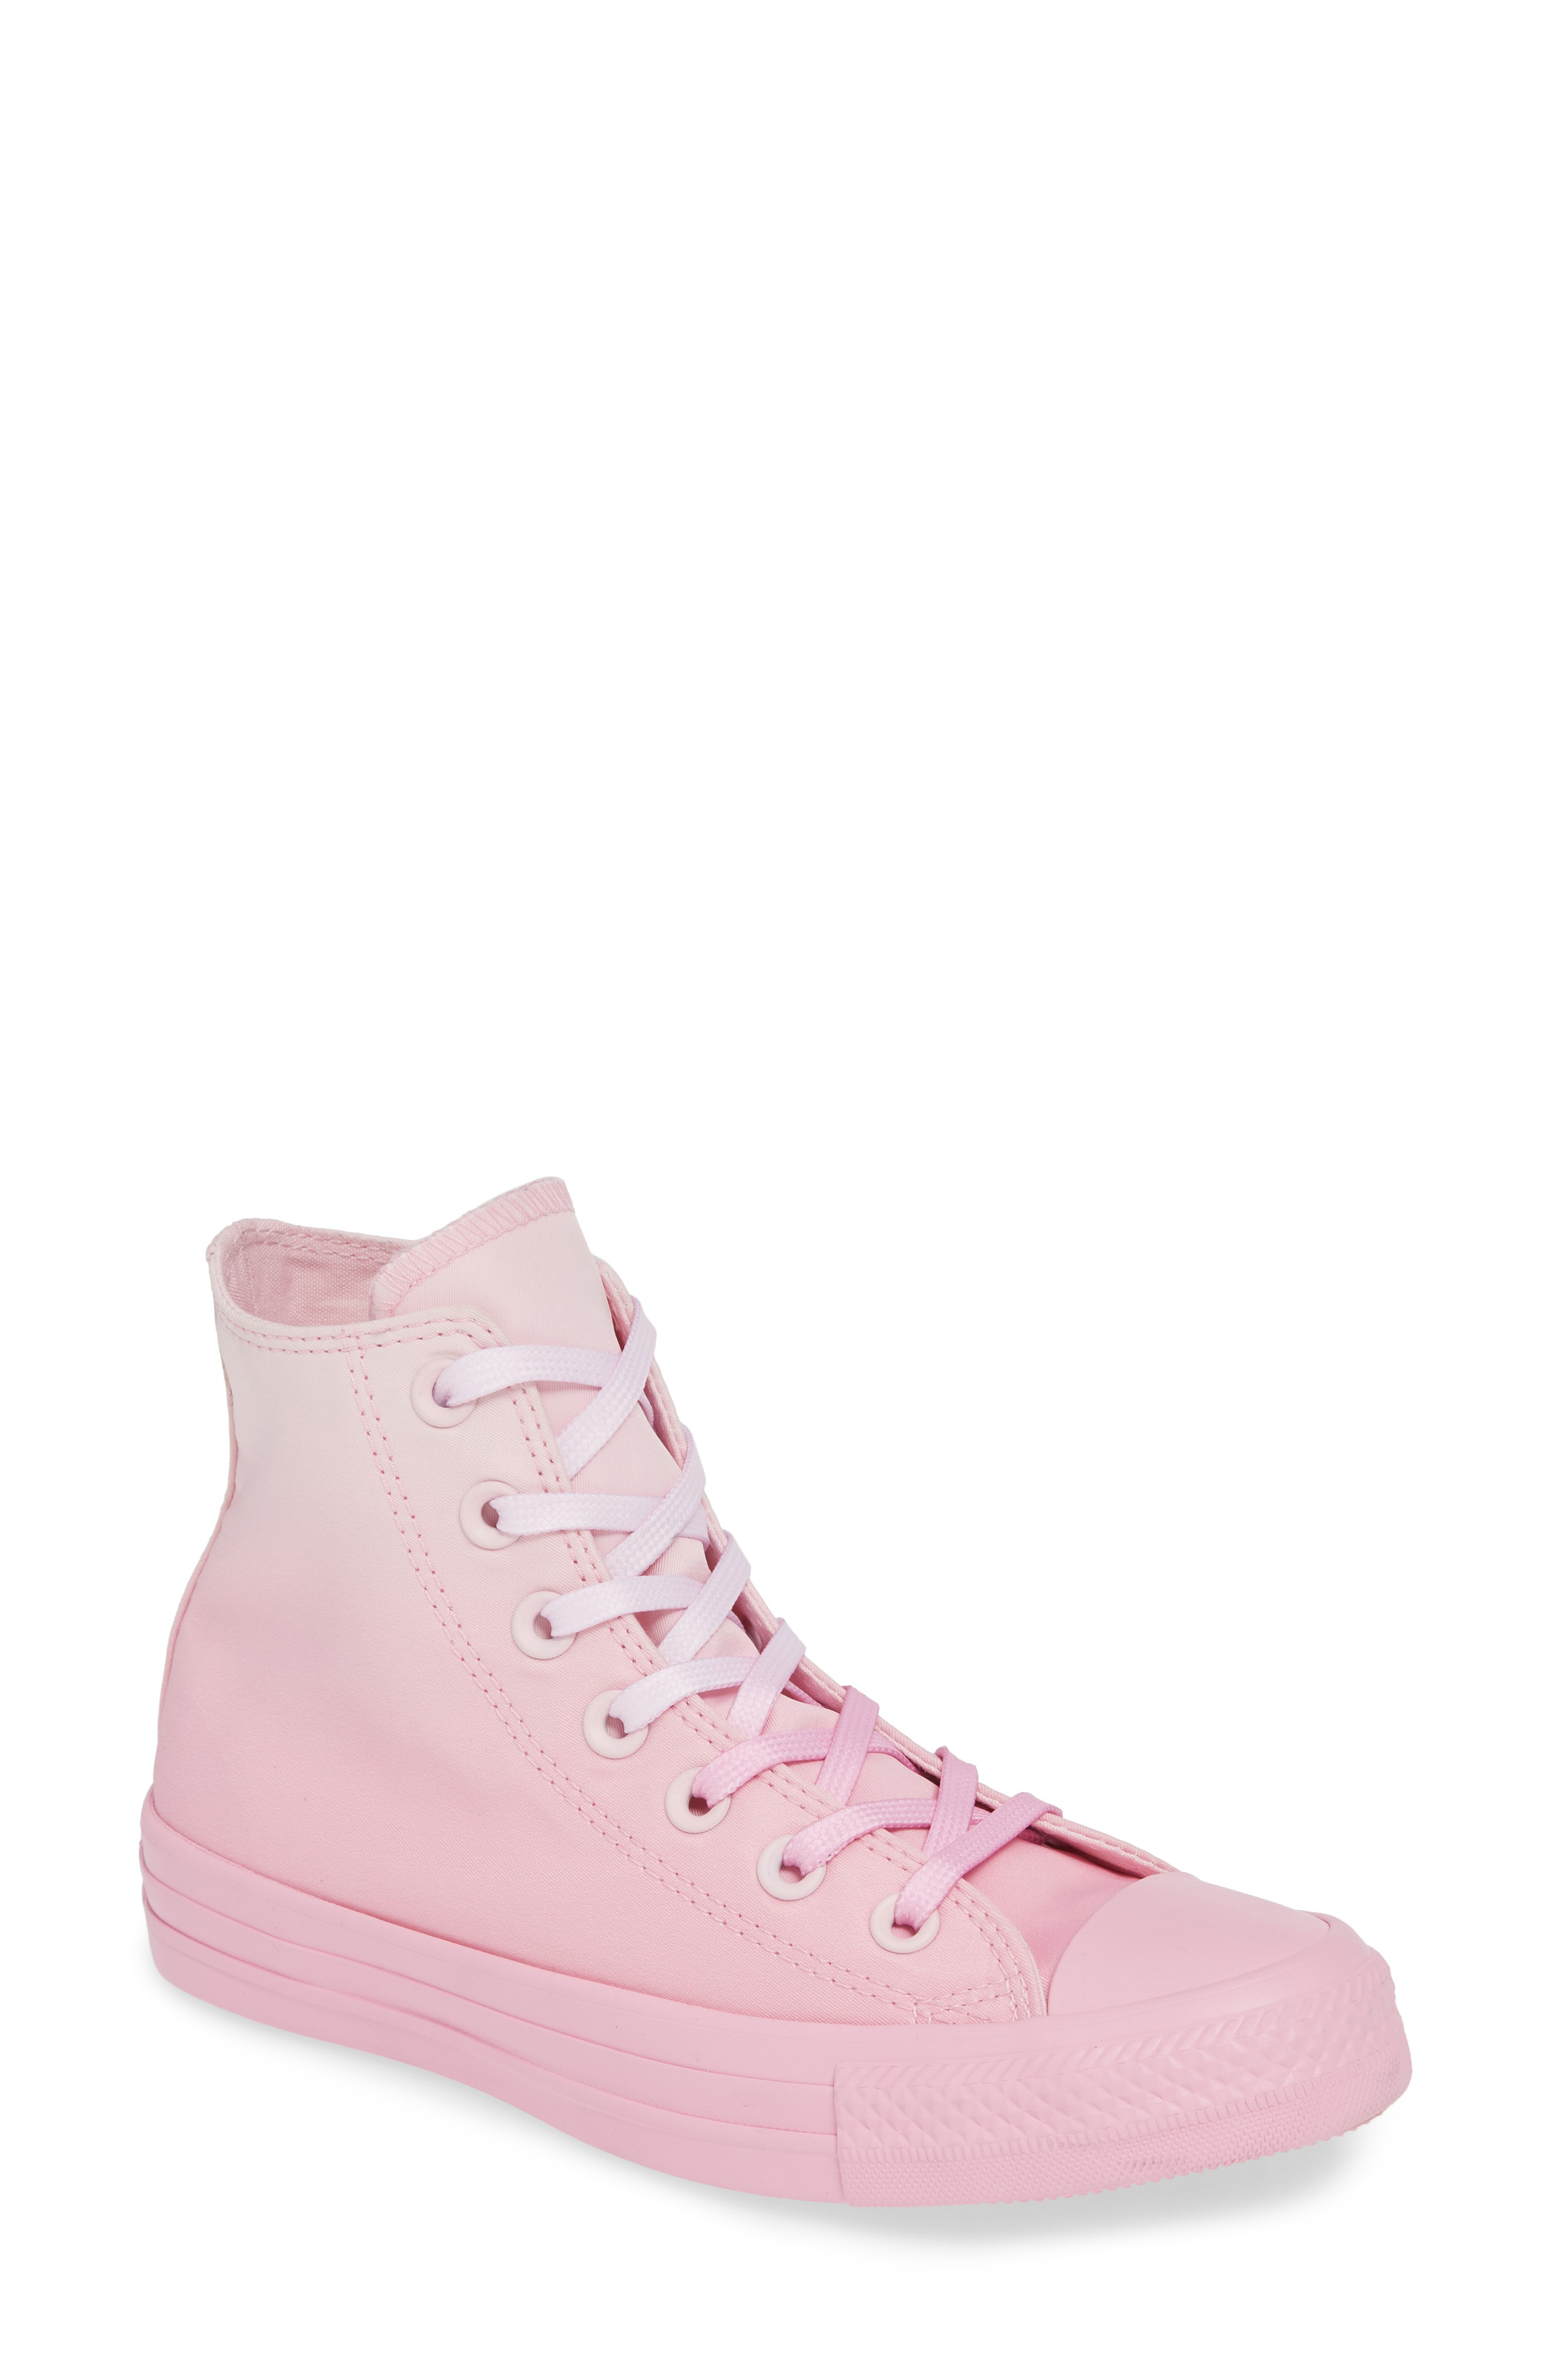 converse chuck taylor all star ombre wash high top